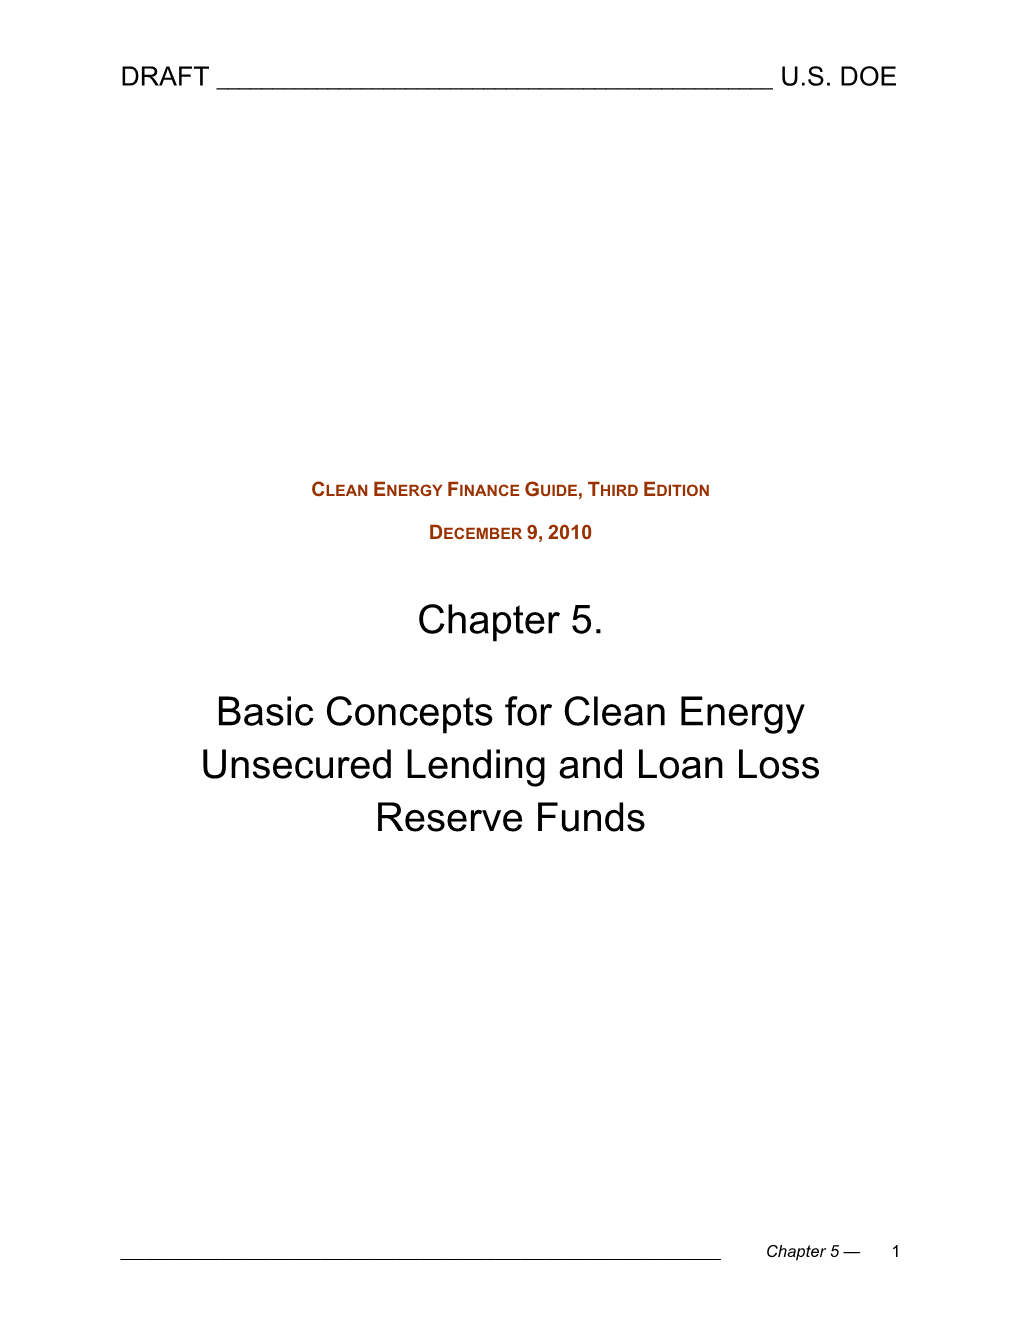 Chapter 5. Basic Concepts for Clean Energy Unsecured Lending and Loan Loss Reserve Funds